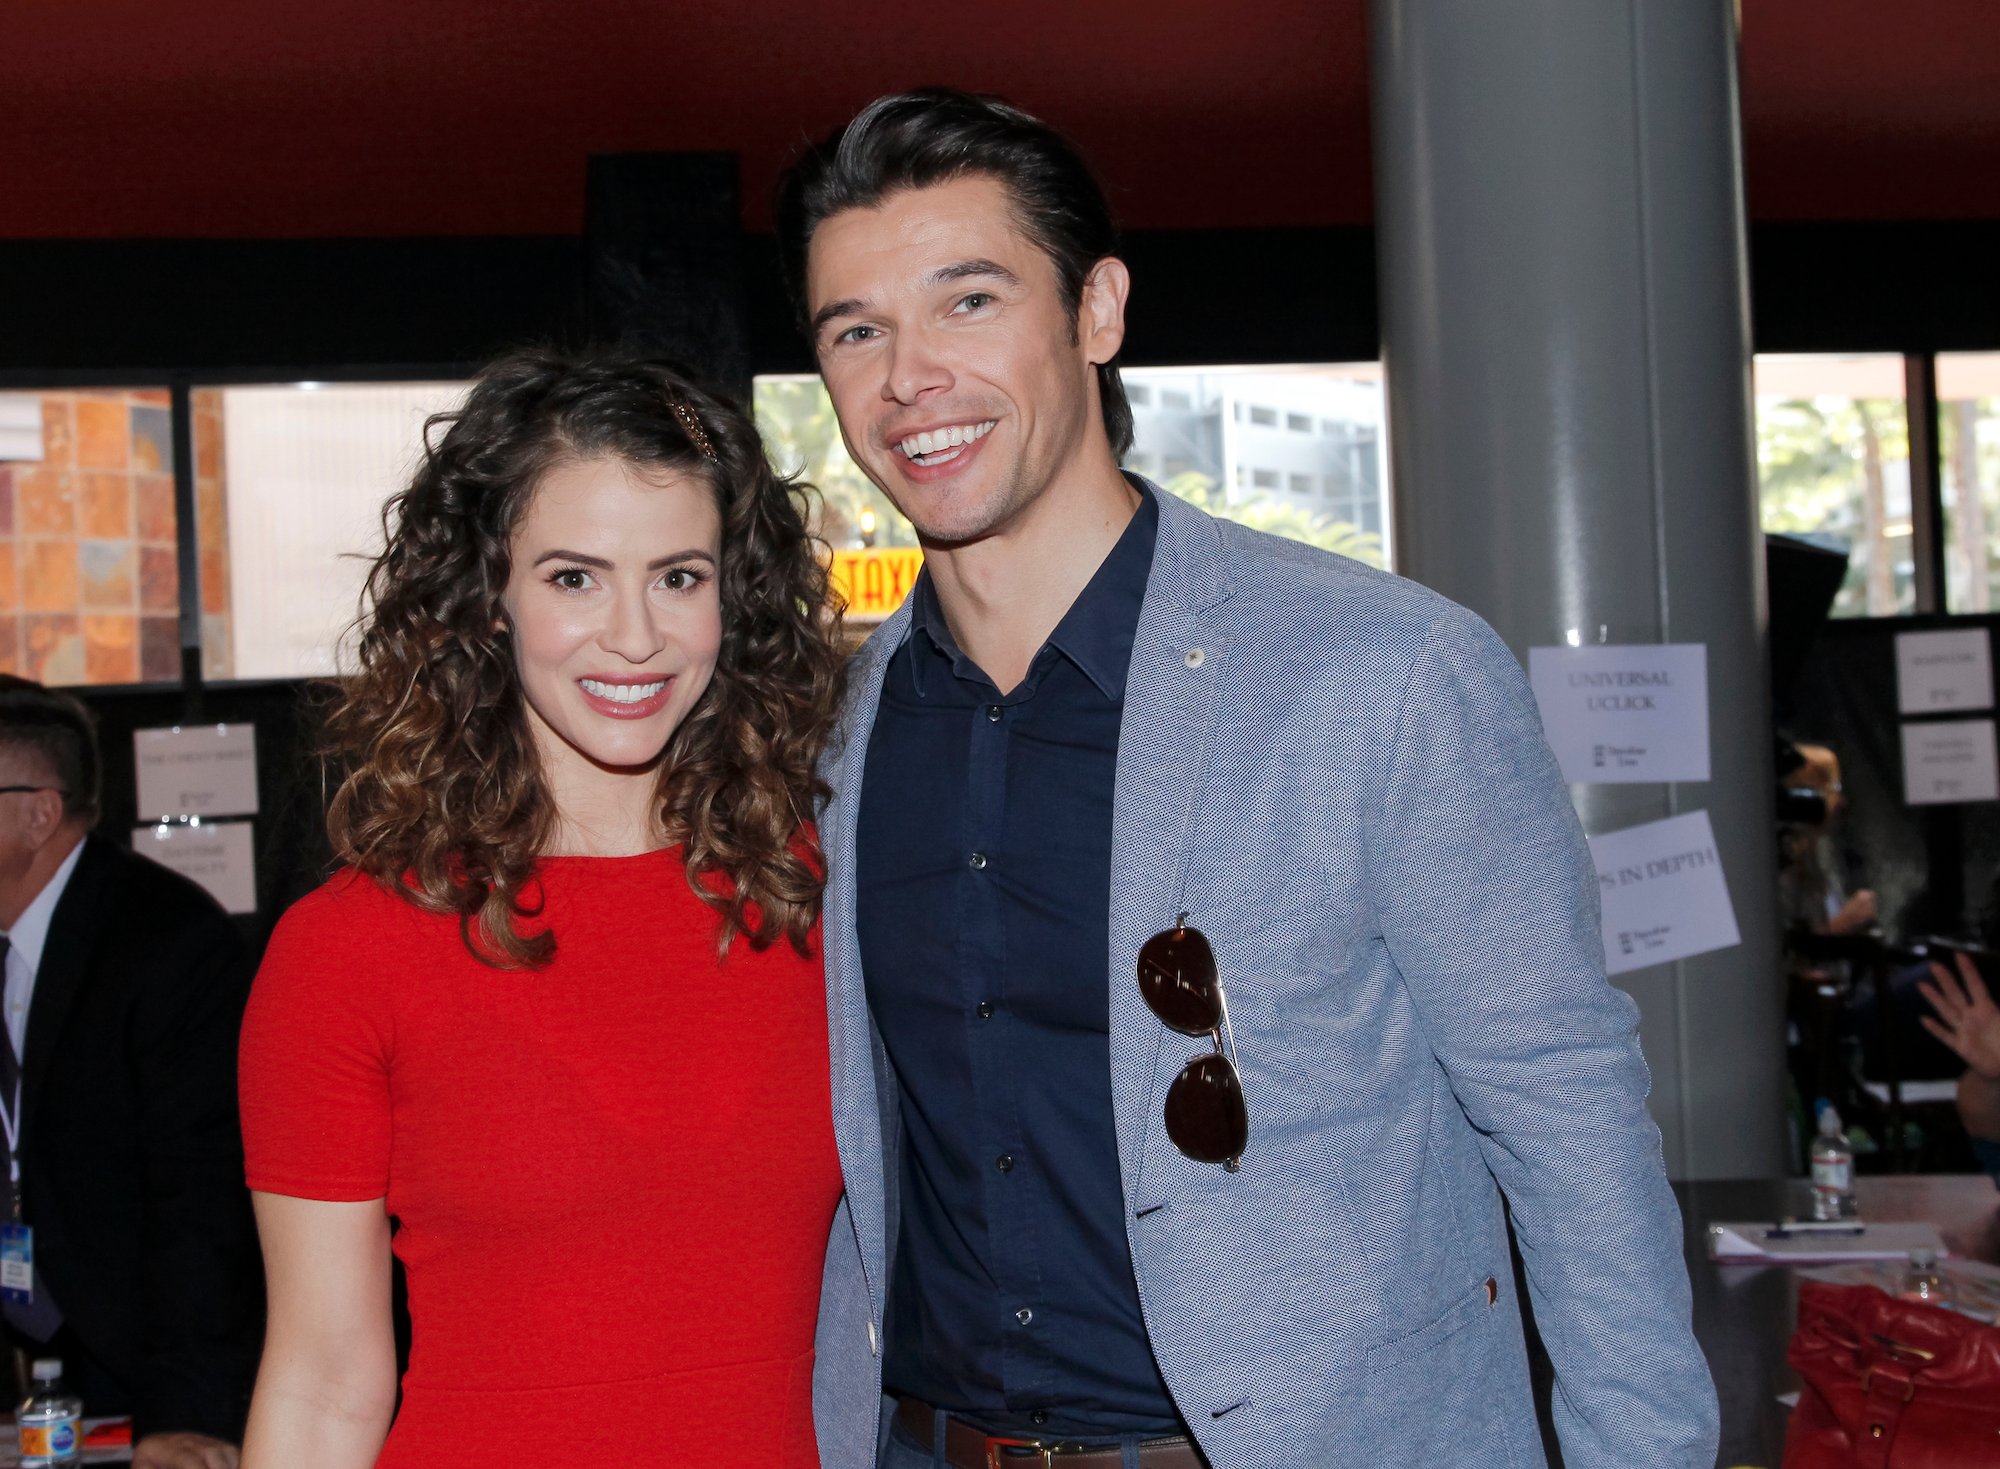 Linsey Godfrey and Paul Telfer smiling, looking at the camera